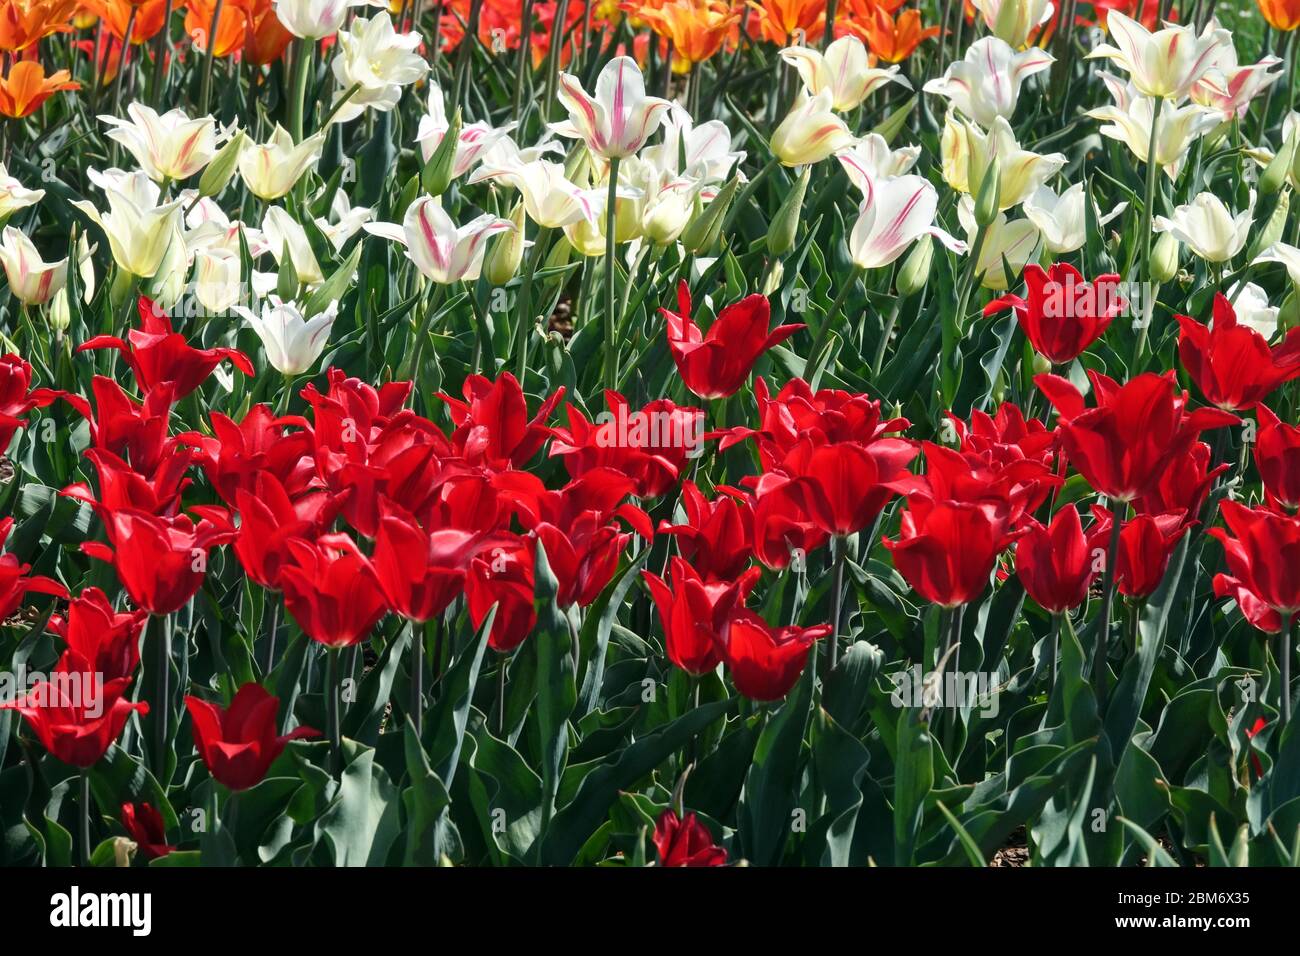 Colorful tulips garden flower bed red white Tulipa 'Moneymaker' and 'Holland Chic' Stock Photo